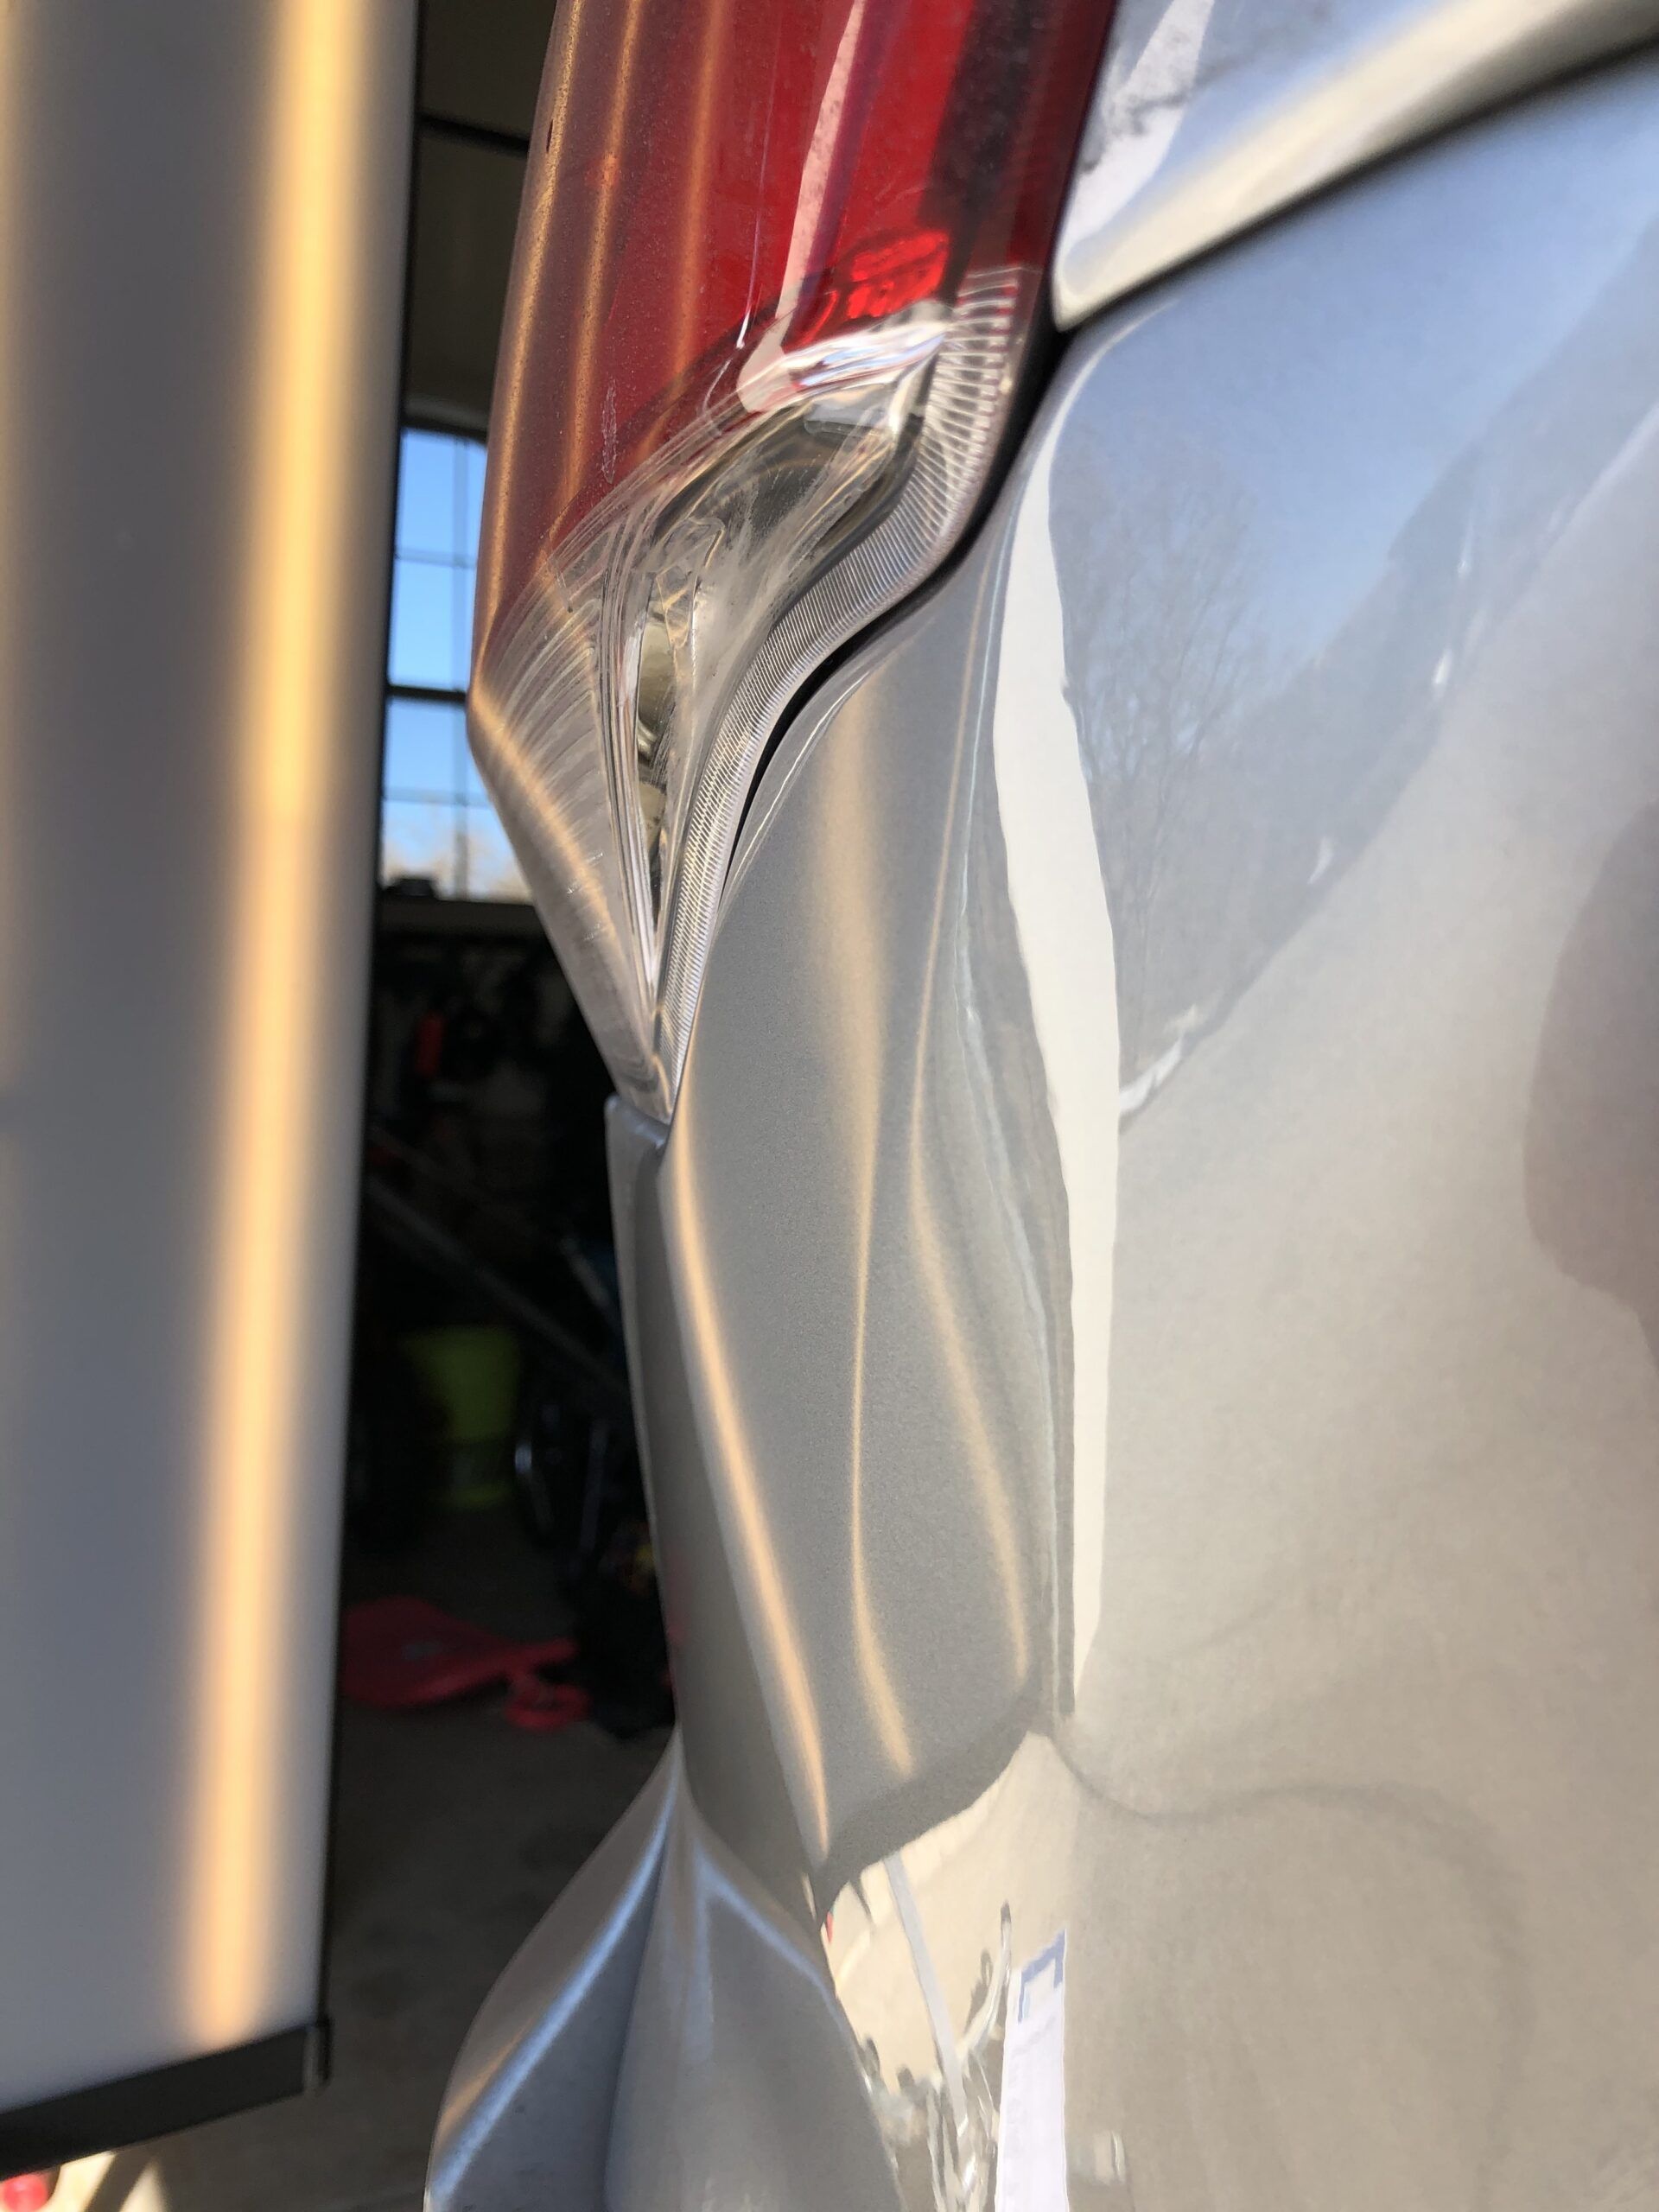 dent on toyota after